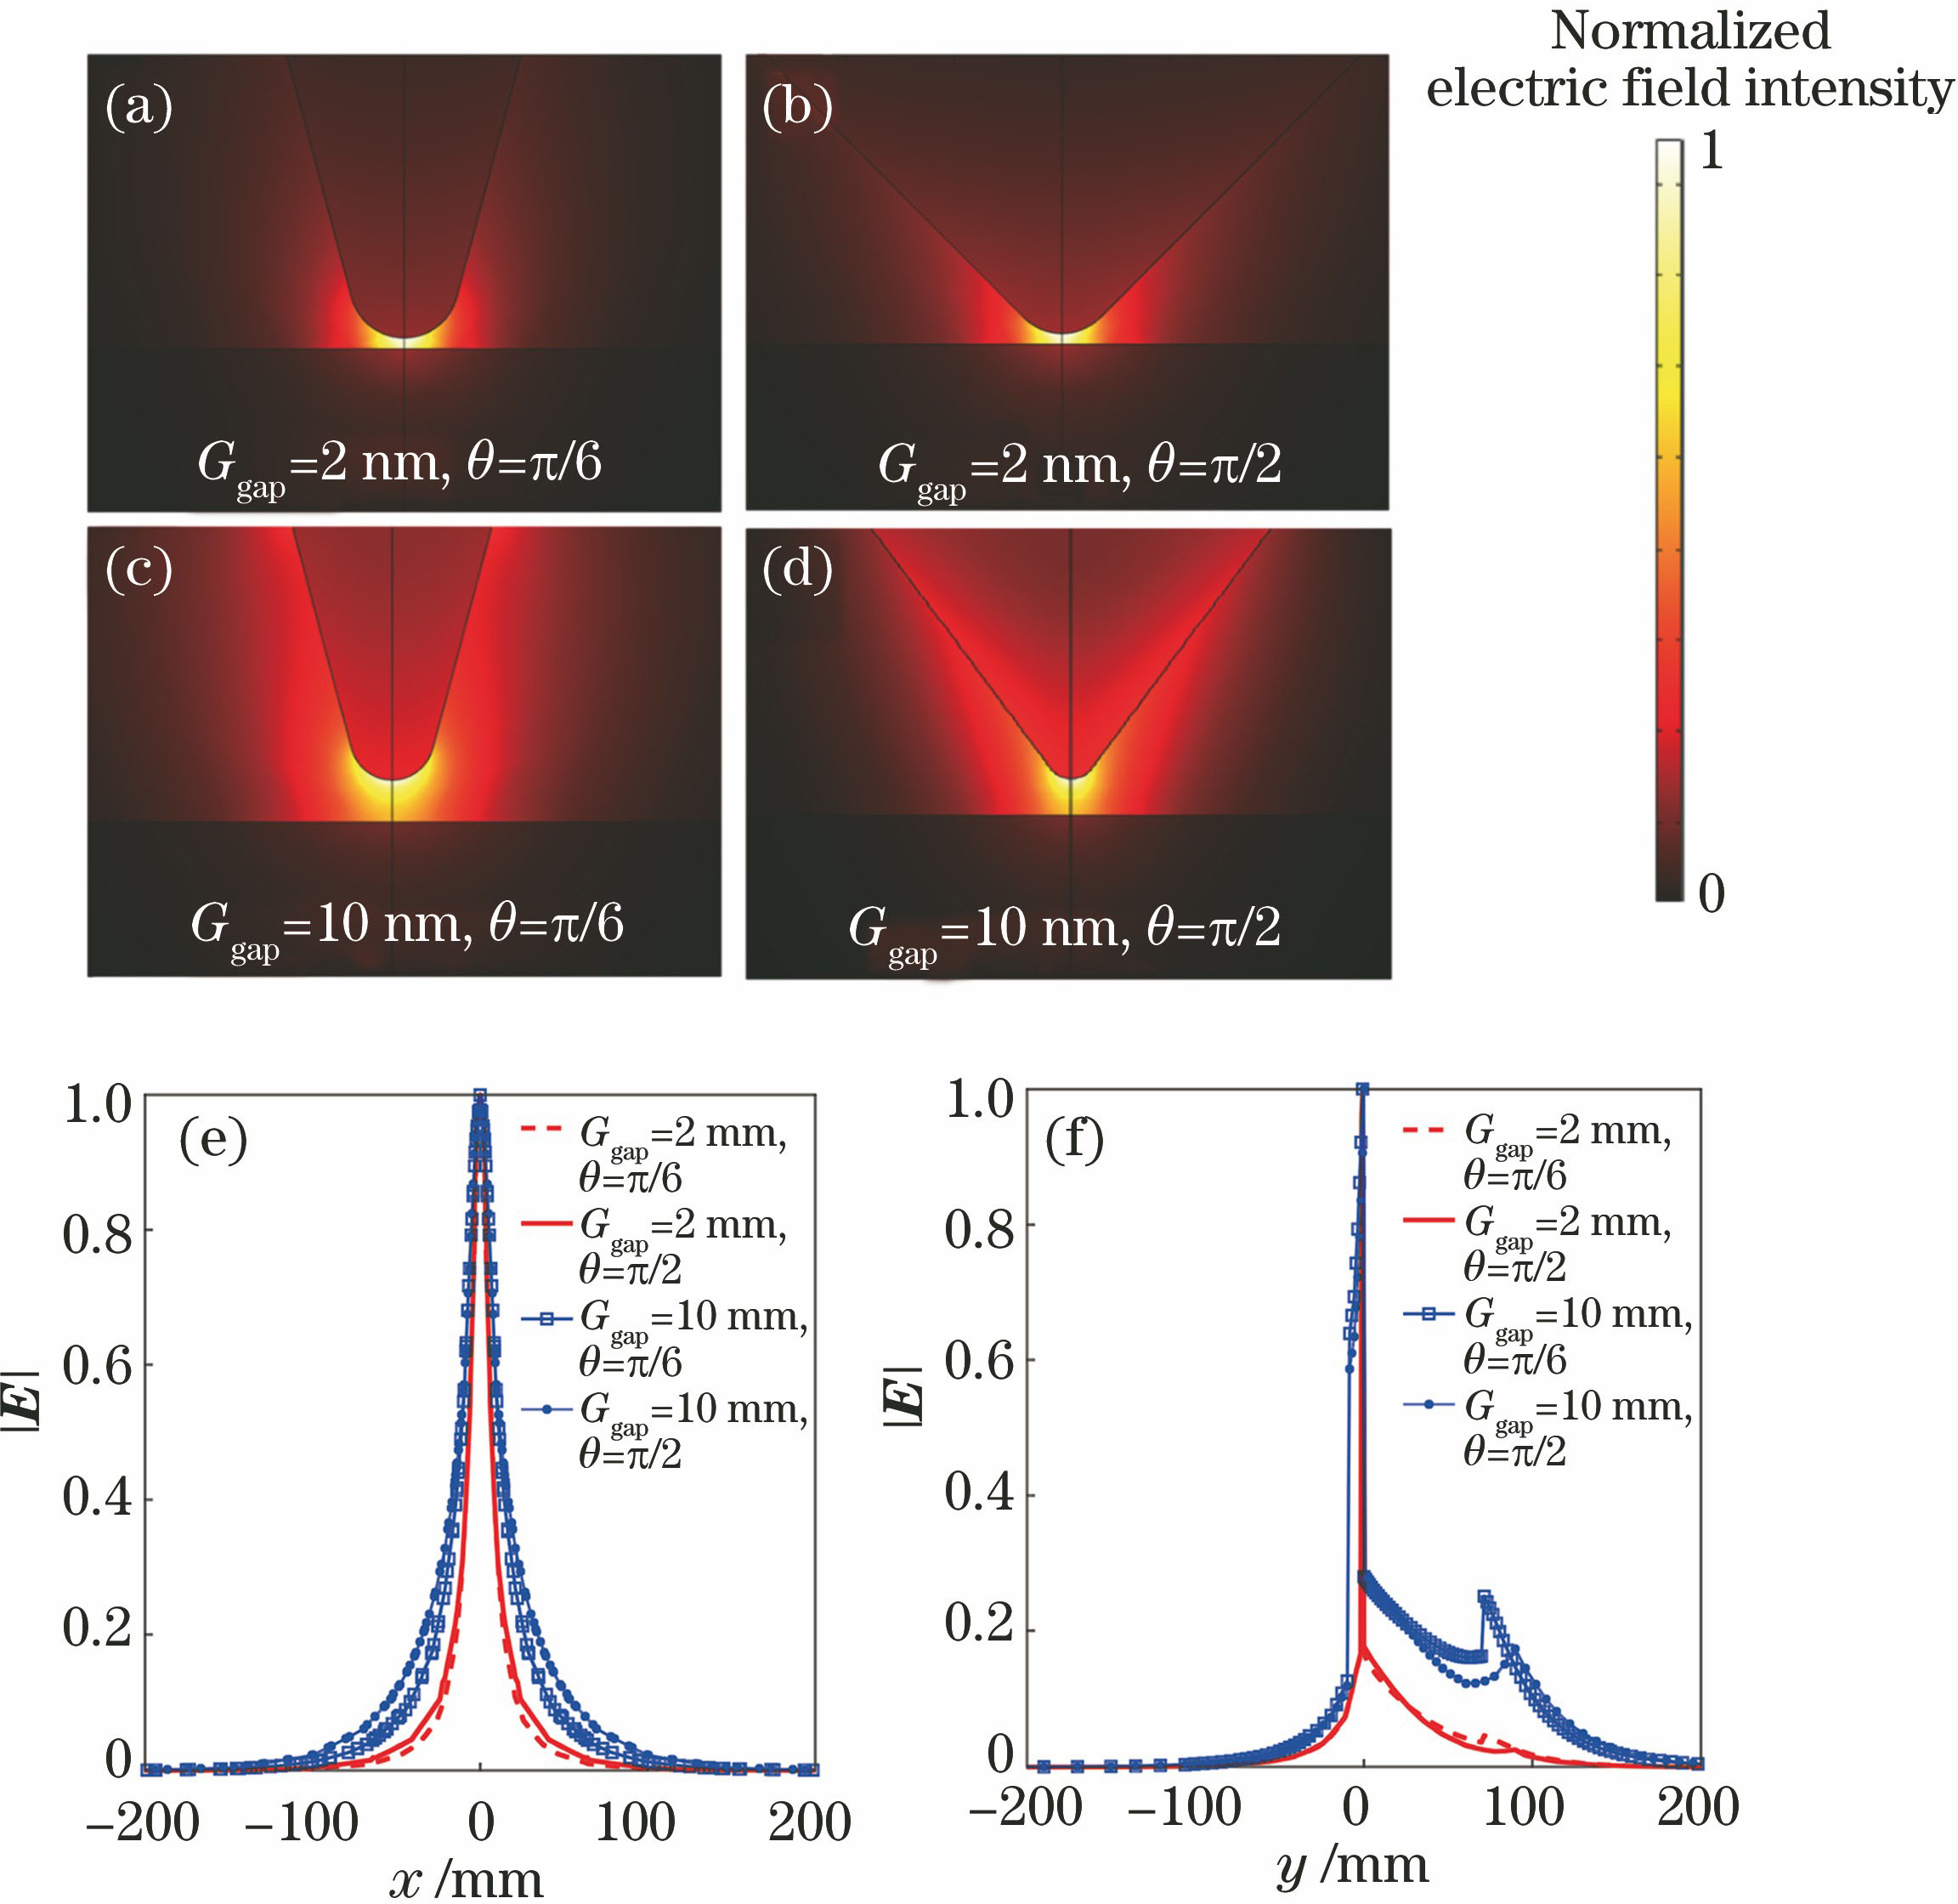 Normalized electric field intensity distributions of fundamental mode when μc=0.5 eV,f0=30 THz,and R=10 nm. (a) Under θ=π/6, Ggap=2 nm; (b) under θ=π/2, Ggap=2 nm;(c) under θ =π/6, Ggap=10 nm; (d) under θ=π/2, Ggap=10 nm; normalized electric field intensity distributions along (e) x and (f) y directions